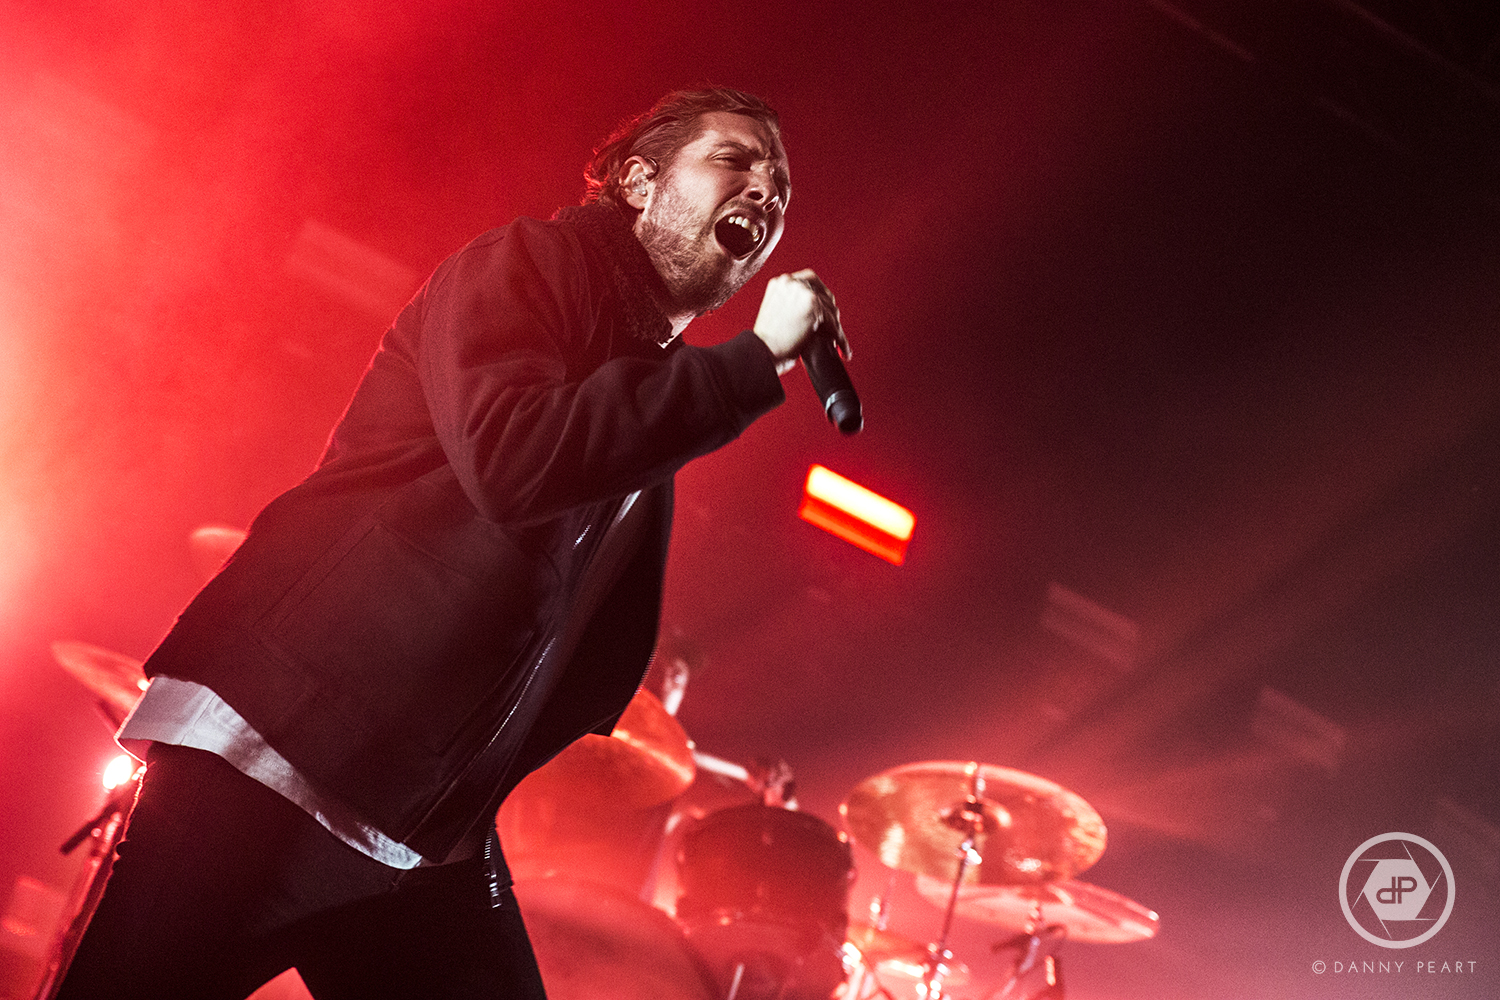 You Me At Six return with an earth shattering performance in Leeds!